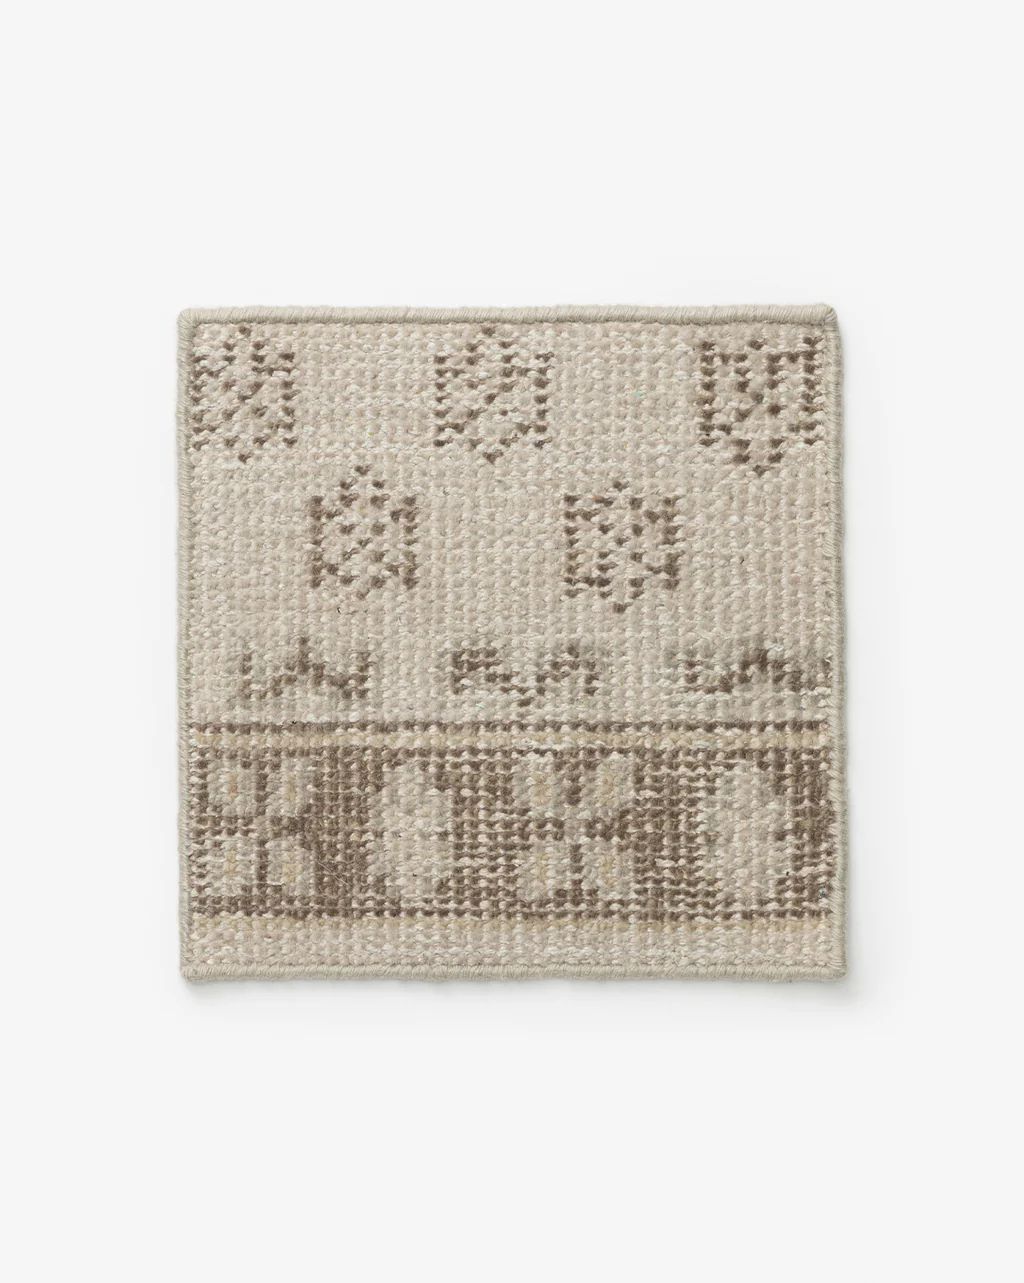 Anya Neutral Hand-Knotted Wool Rug Swatch | McGee & Co.